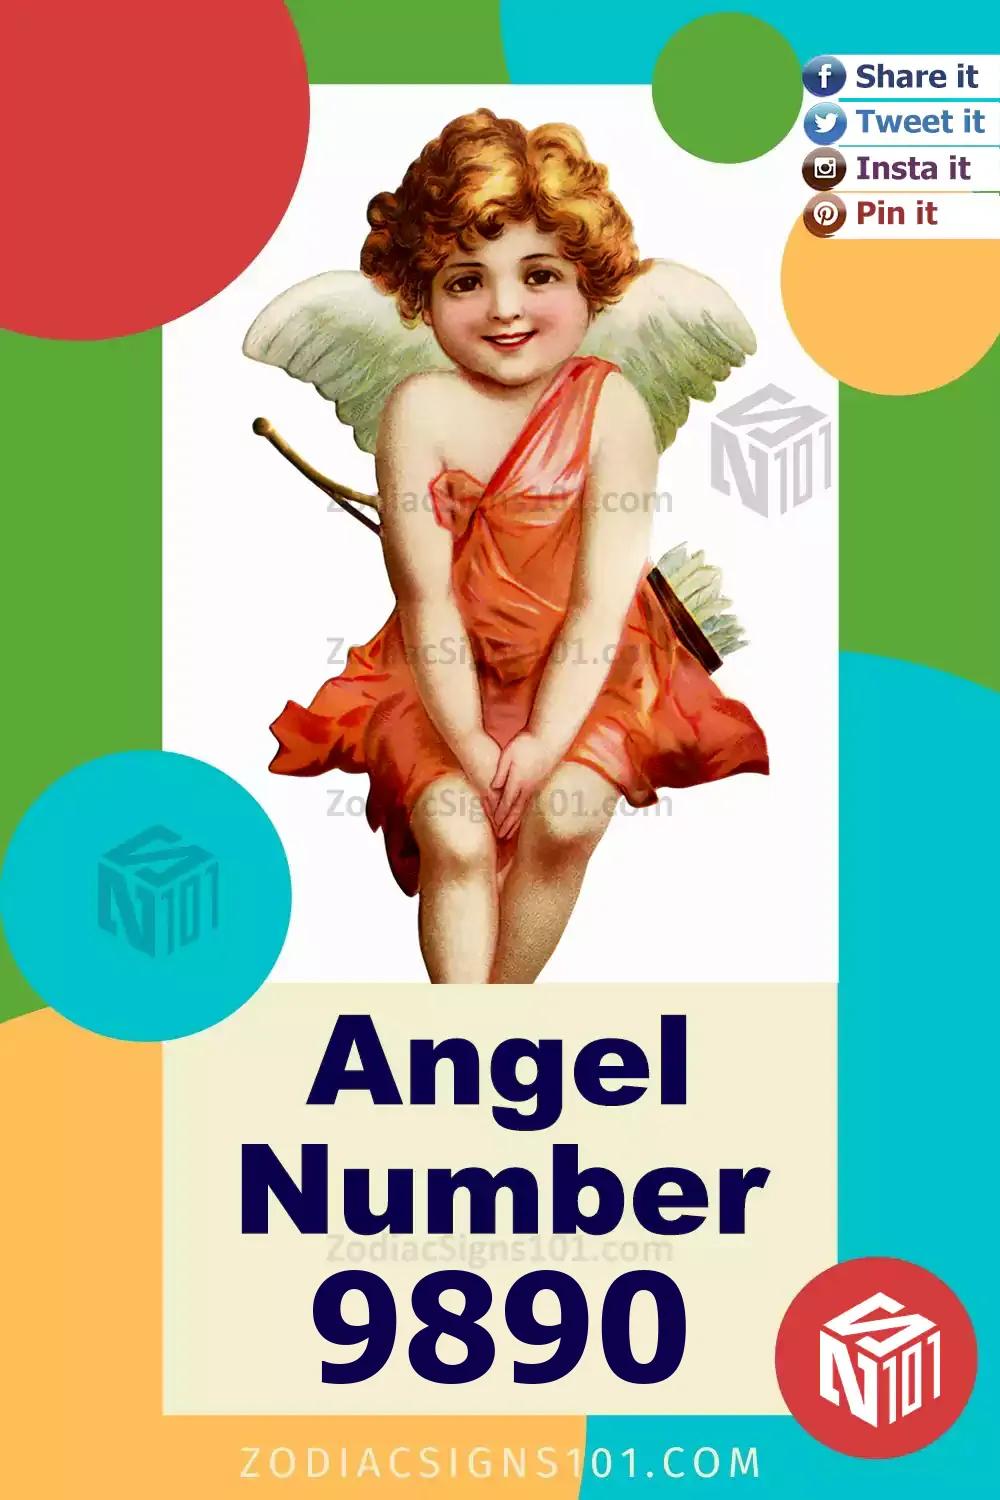 9890 Angel Number Meaning